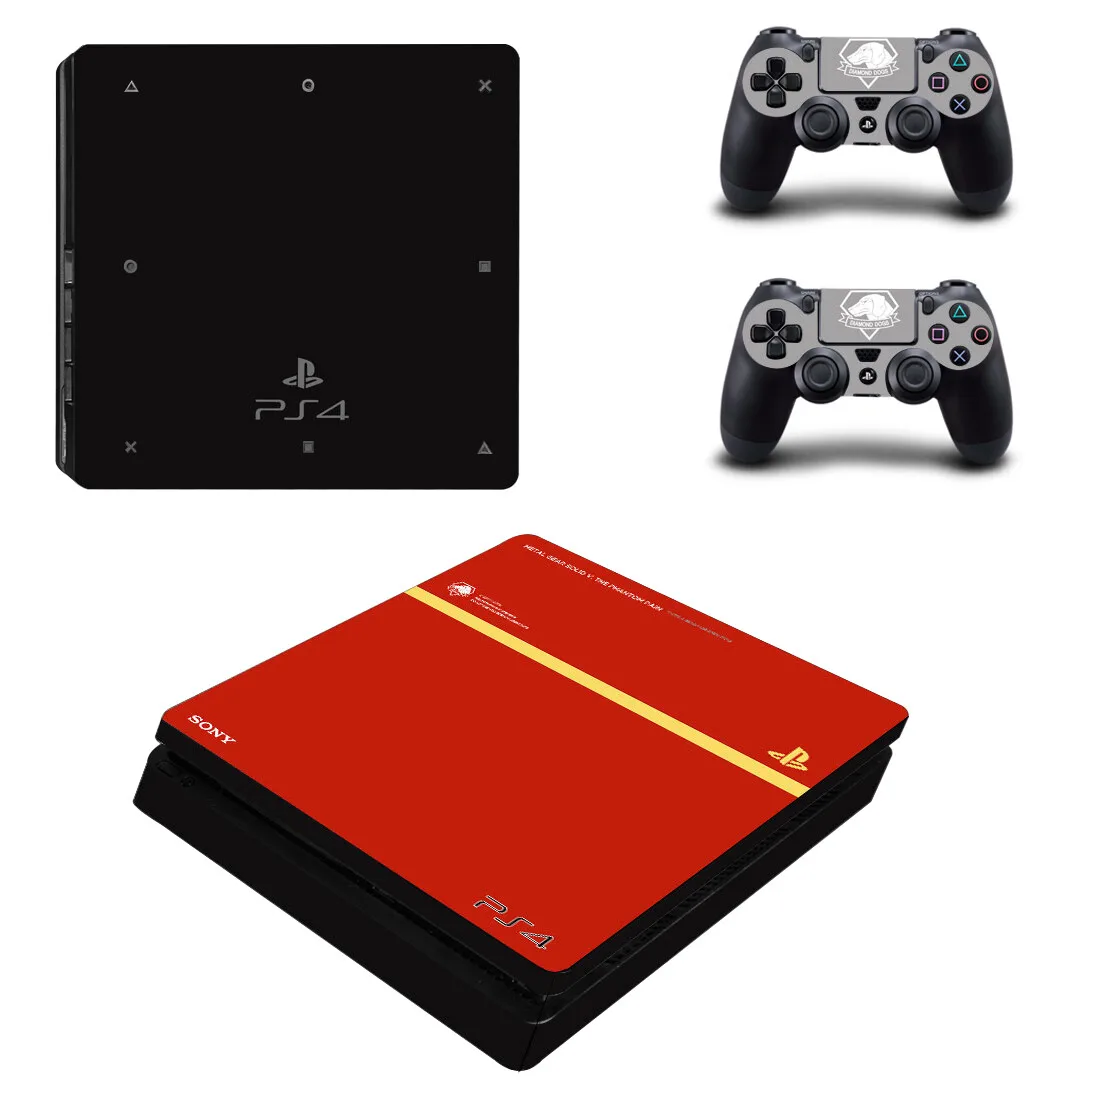 

Metal Gear Solid PS4 Slim Skin Sticker For Sony PlayStation 4 Console and Controllers PS4 Slim Skins Sticker Decal Vinyl